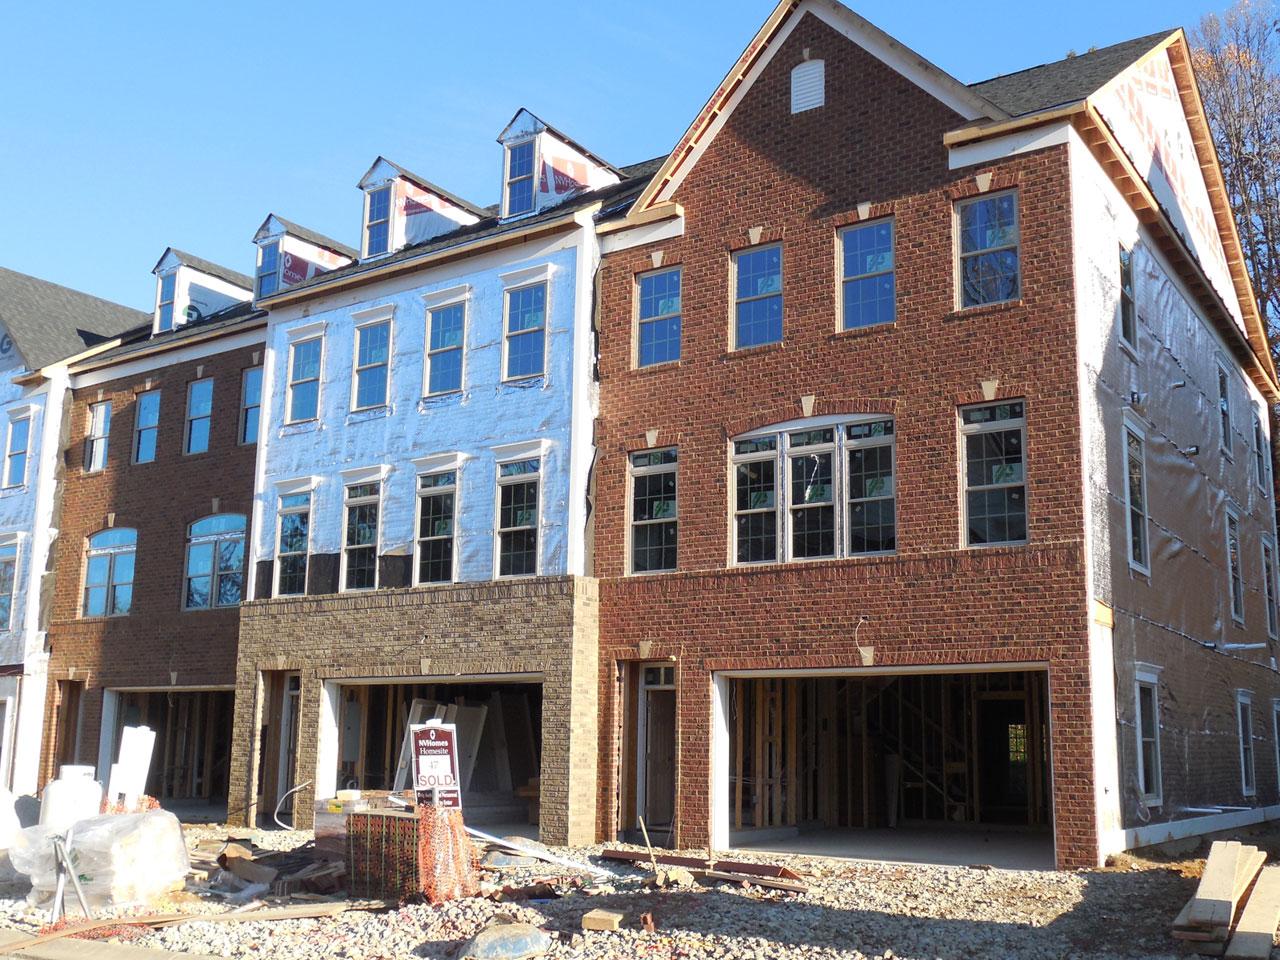 Townhouses being constructed